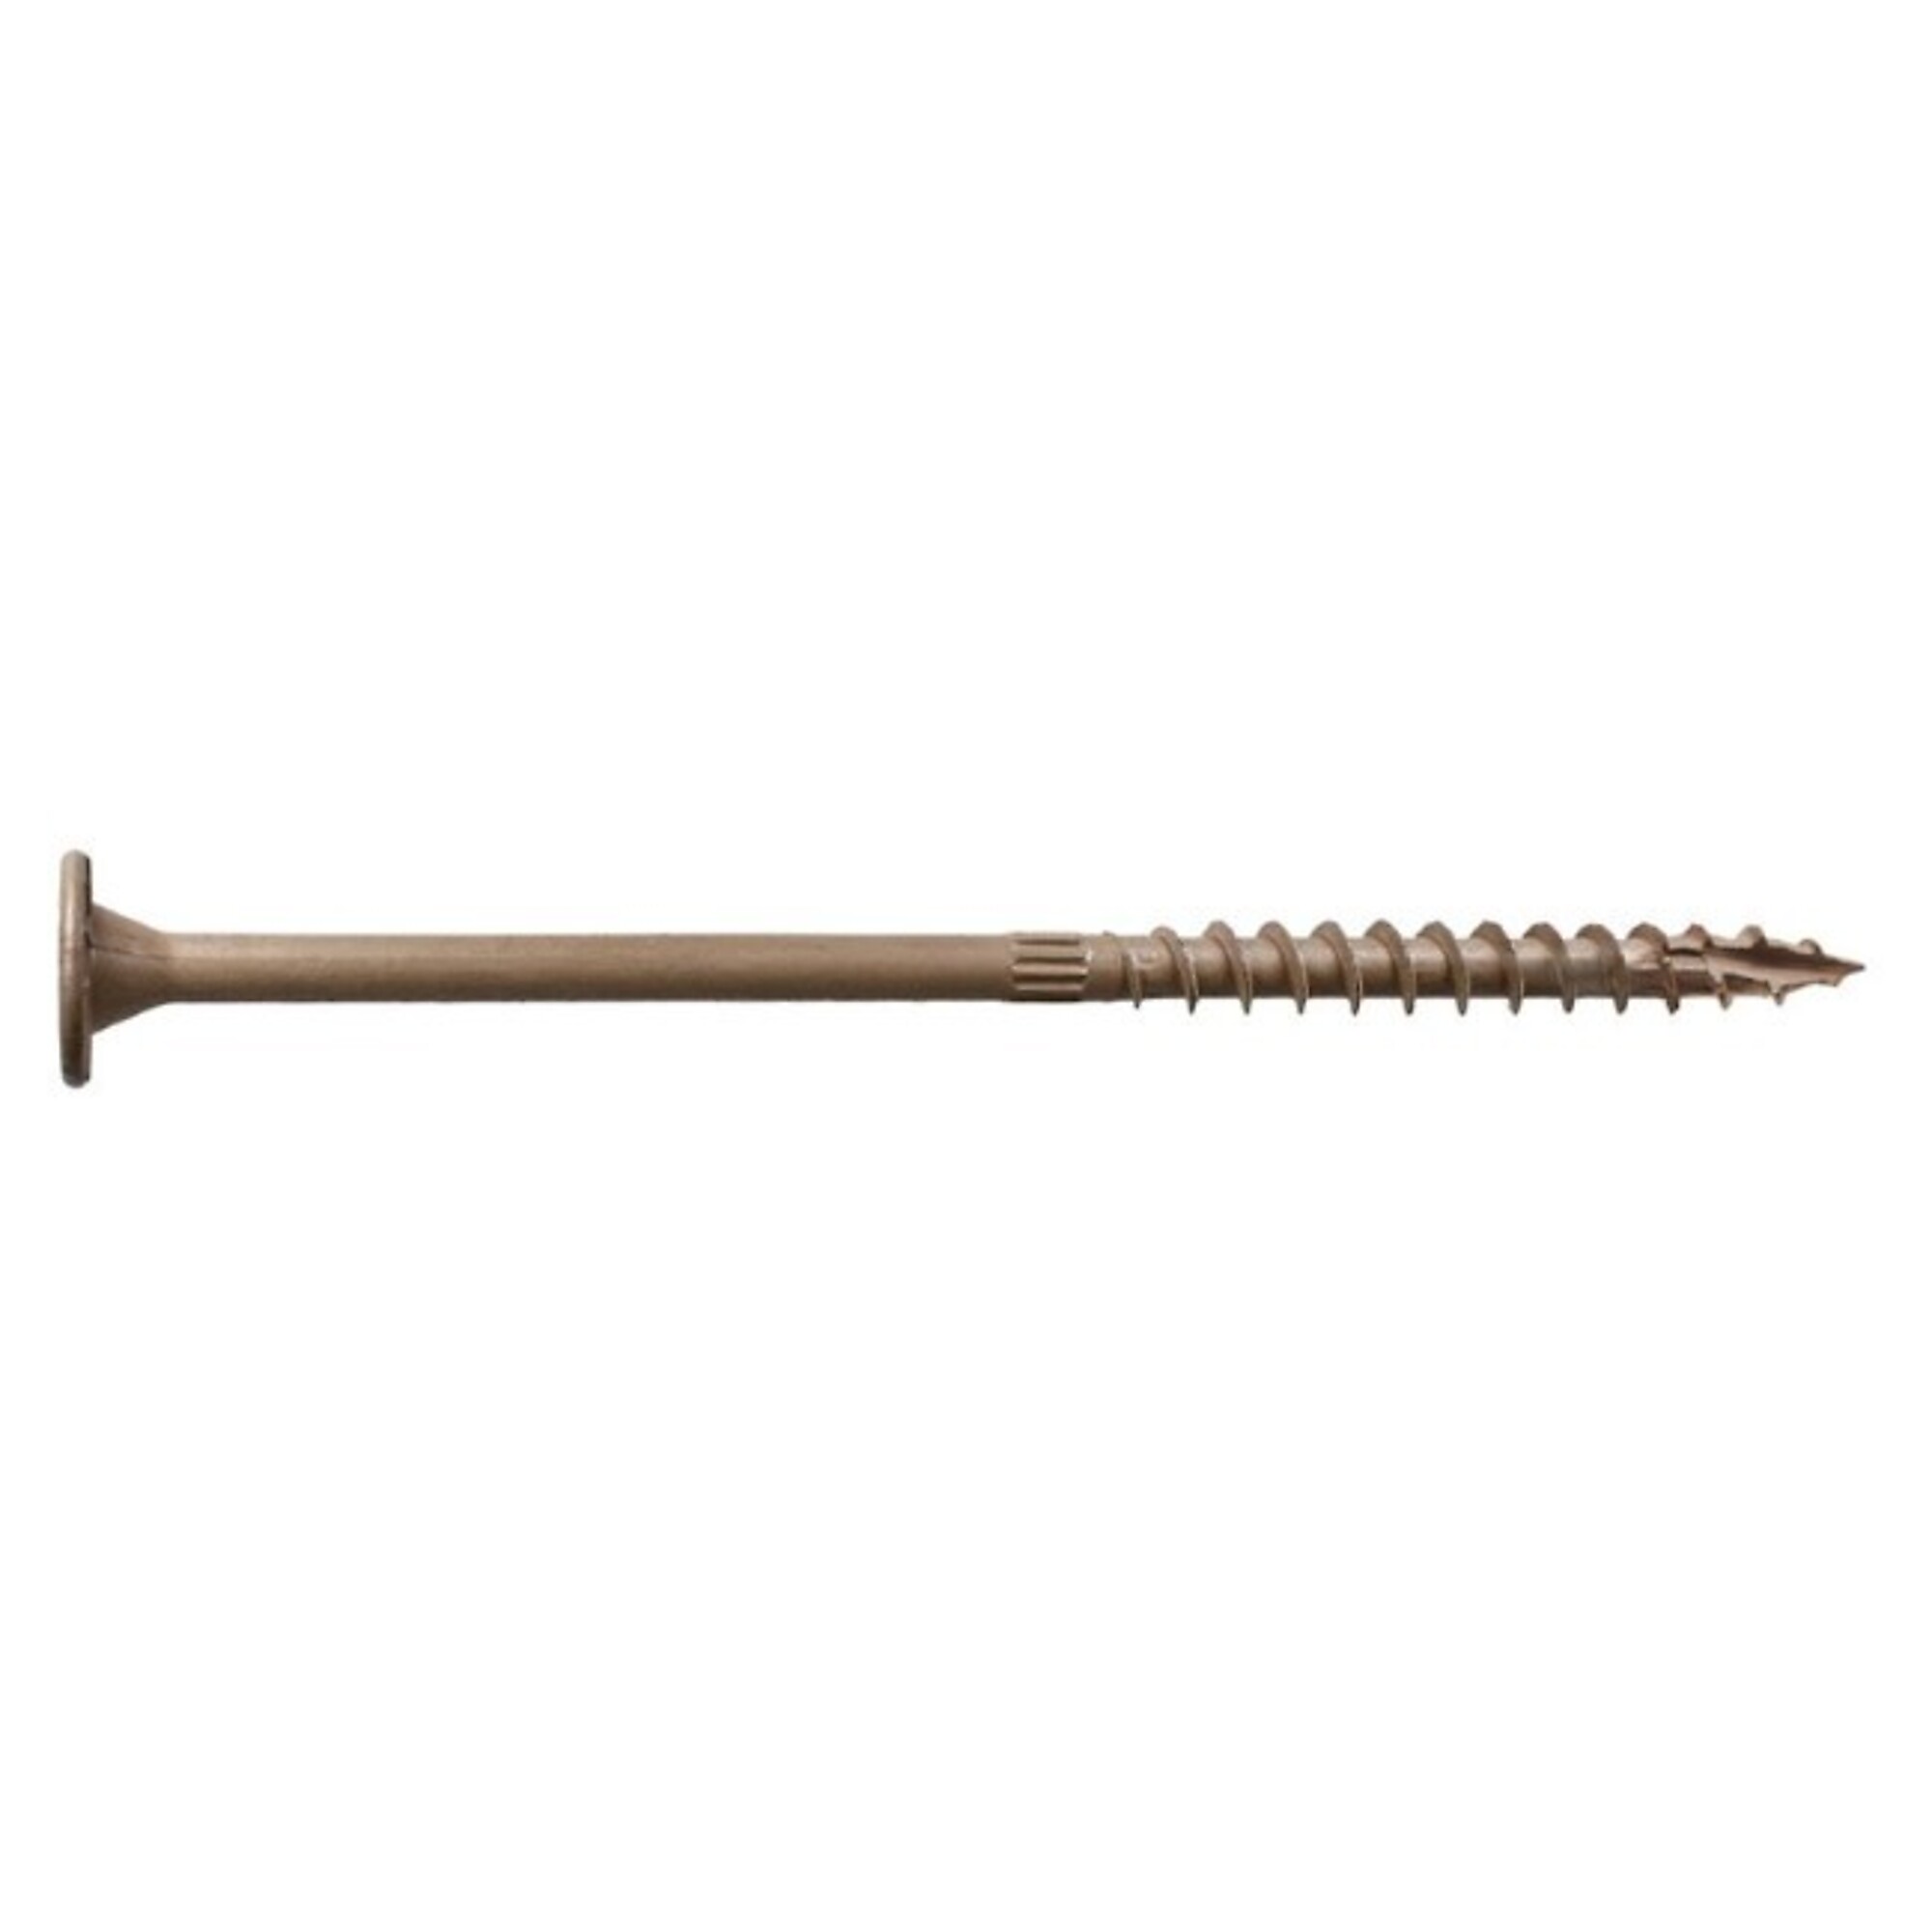 Simpson, Strong-Tie 6Inch x .220 Timber Screws, Included (qty.) 50, Model SDWS22600DB-R50